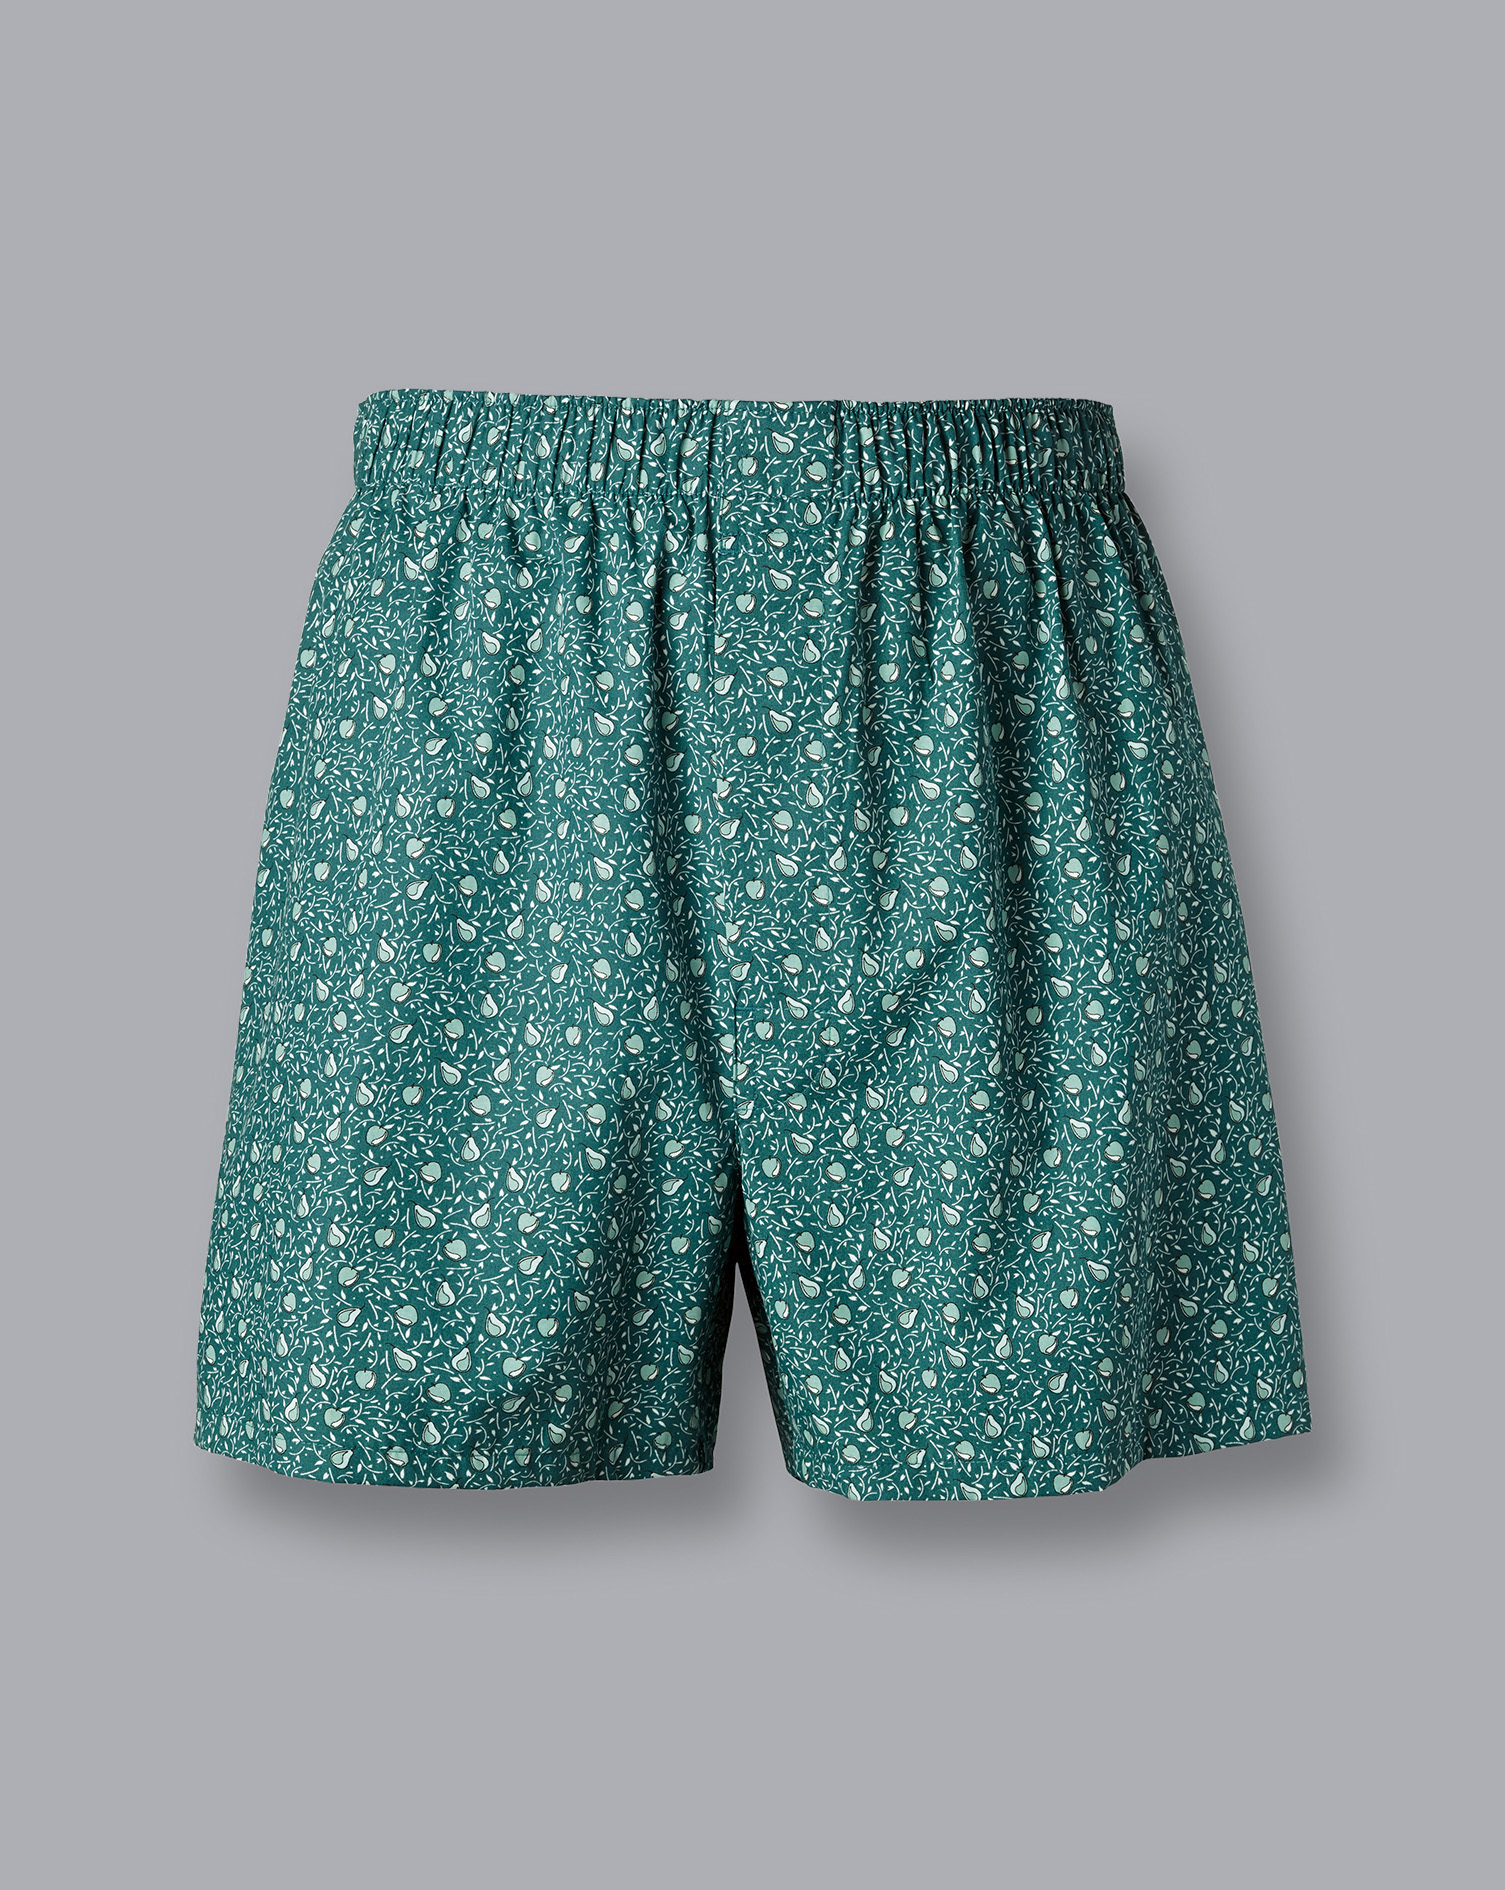 Apples and Pears Motif Woven Boxers - Pale Teal Green Size Medium
